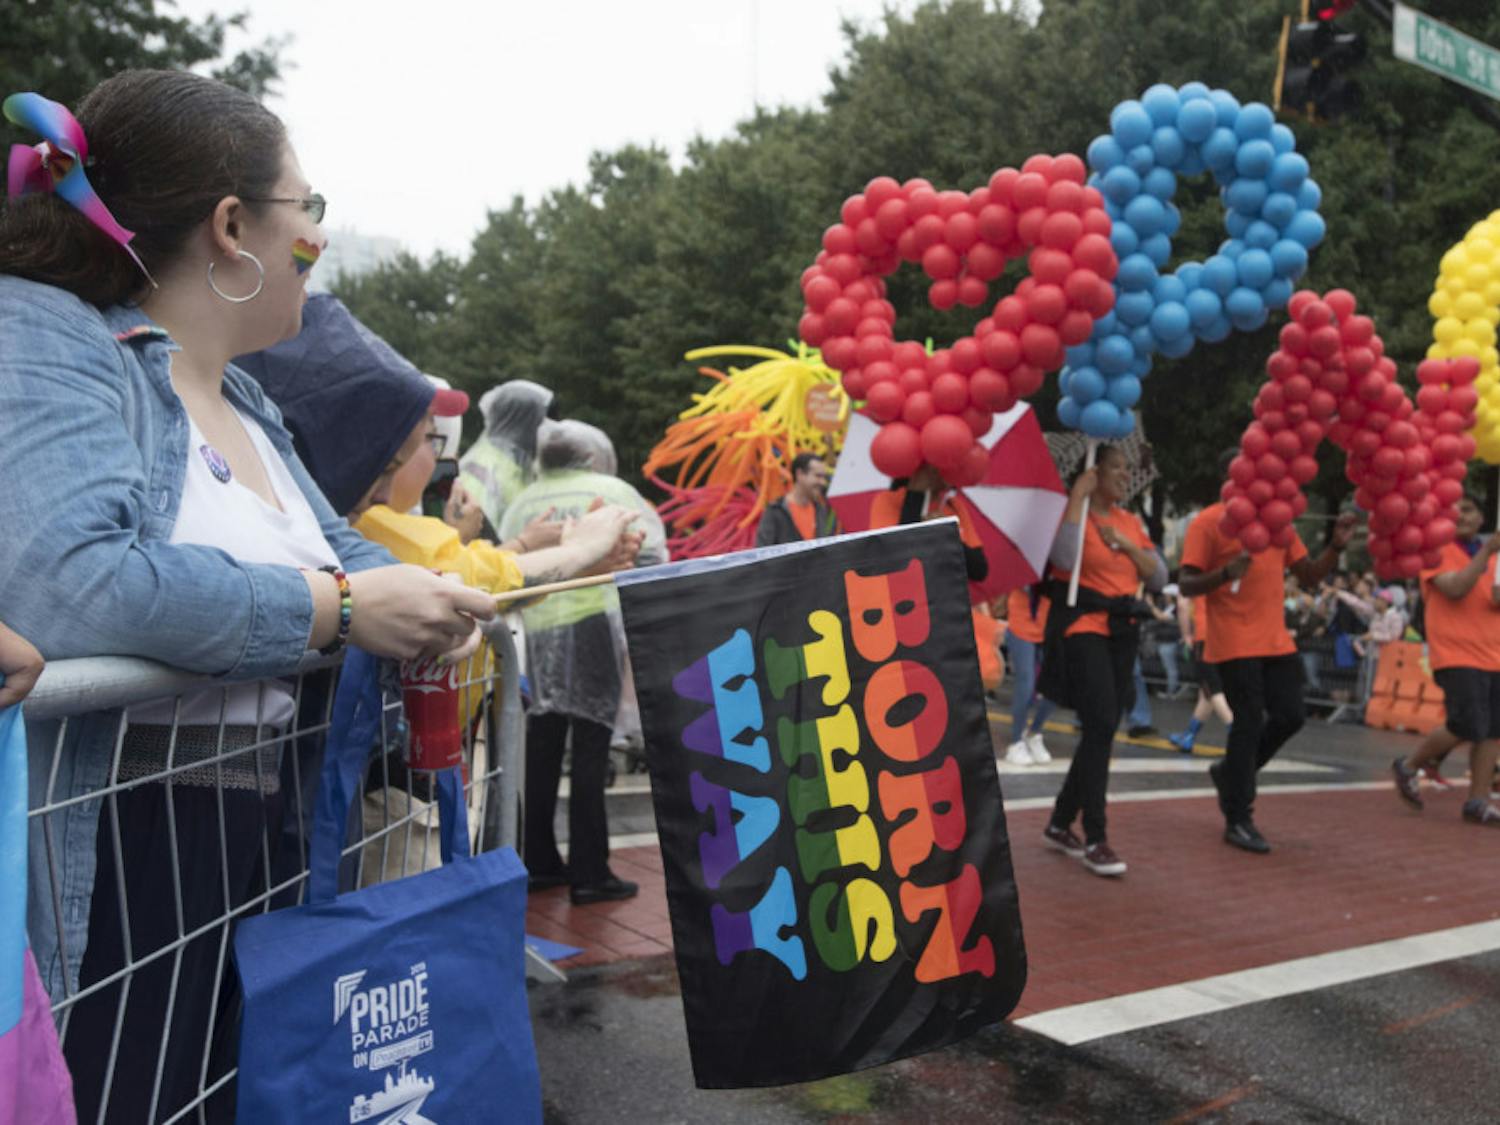 Jessica Cramblett, 27, from Dahlonega, Ga., who identifies as pansexual, holds a "Born This Way" flag as she watches the city's annual Gay Pride parade on Sunday, Oct. 13, 2019, in Atlanta. (AP Photo/ Robin Rayne)